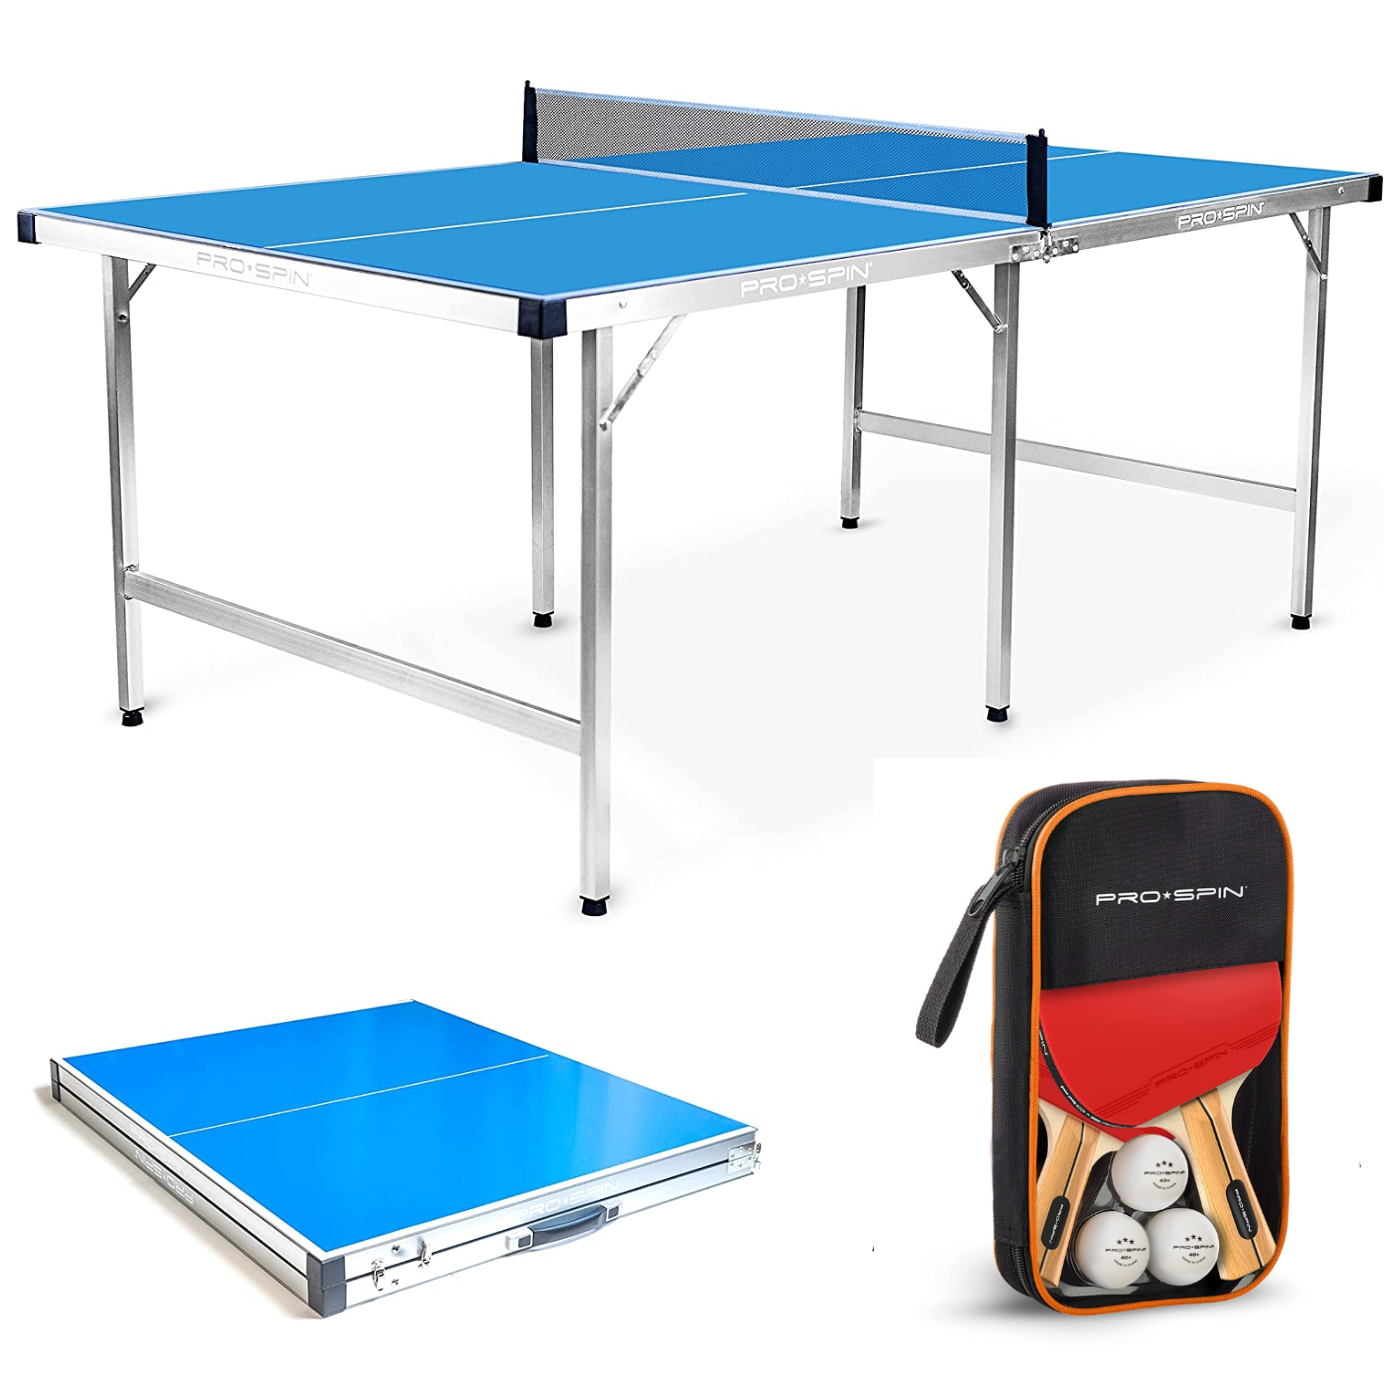 Midsize Portable Ping Pong Table  Pro-Spin Sports – Pro-Spin